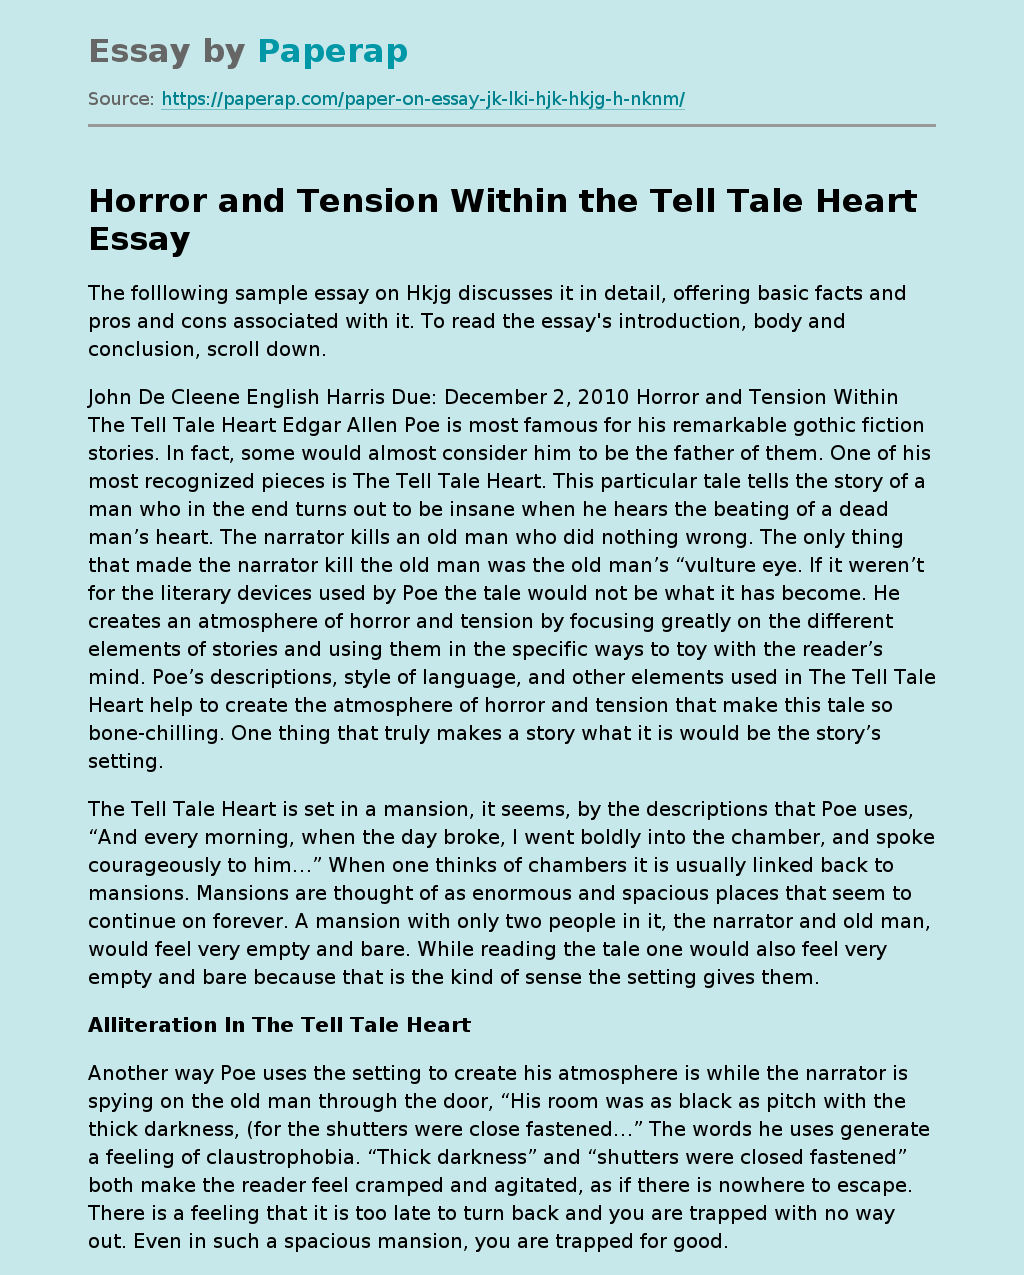 Horror and Tension Within the Tell Tale Heart